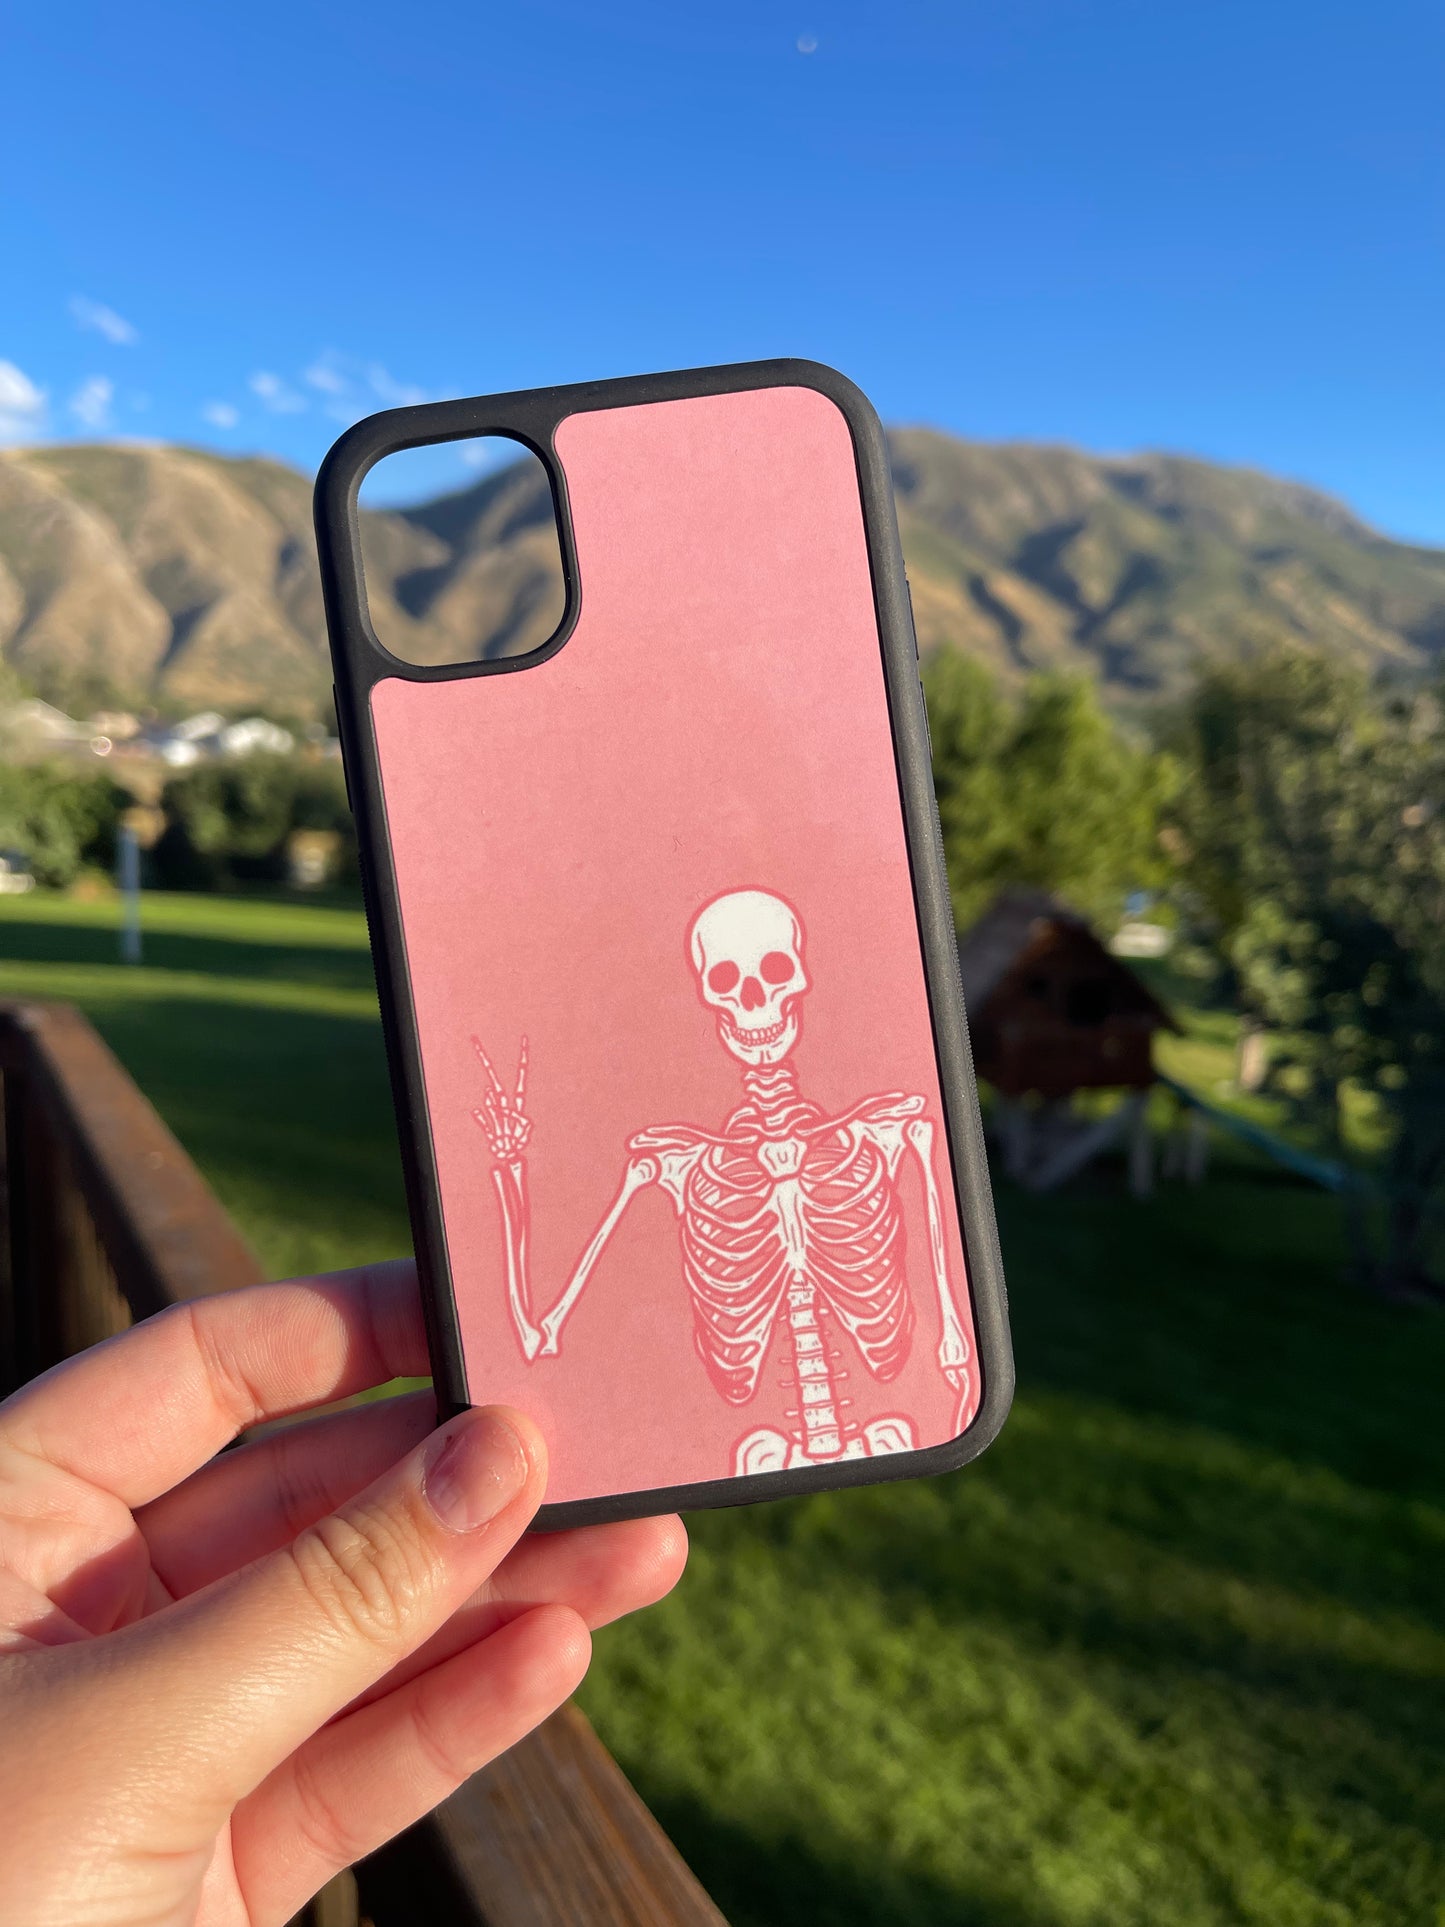 The Pink Peace Phone Case